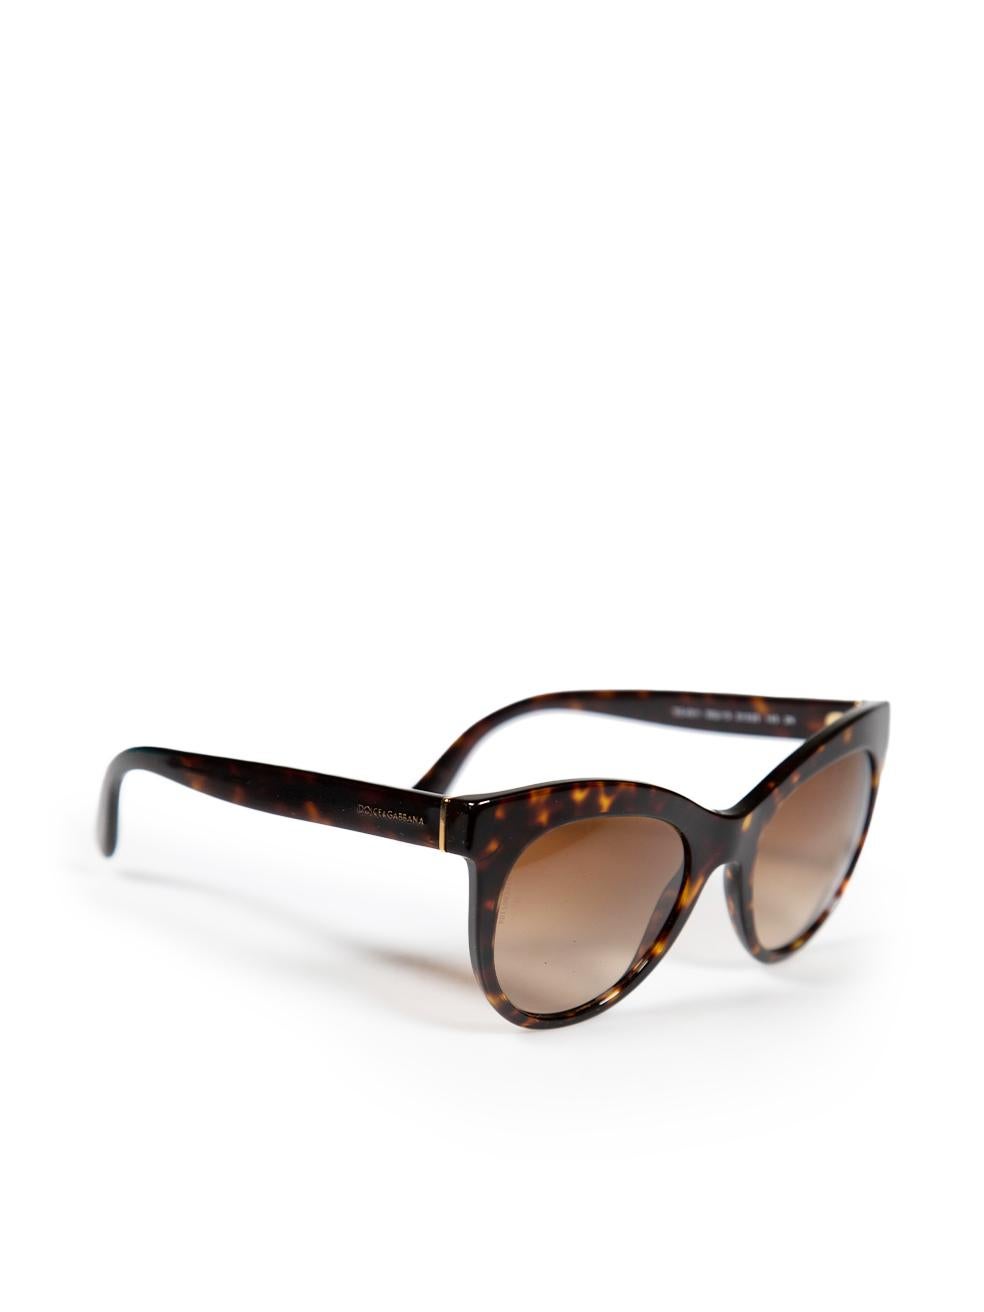 CONDITION is Very good. Hardly any visible wear to sunglasses is evident on this used Dolce & Gabbana designer resale item. This item comes with original dust bag and box.
 
 
 
 Details
 
 
 Brown
 
 Plastic
 
 Sunglasses
 
 Tortoiseshell pattern
